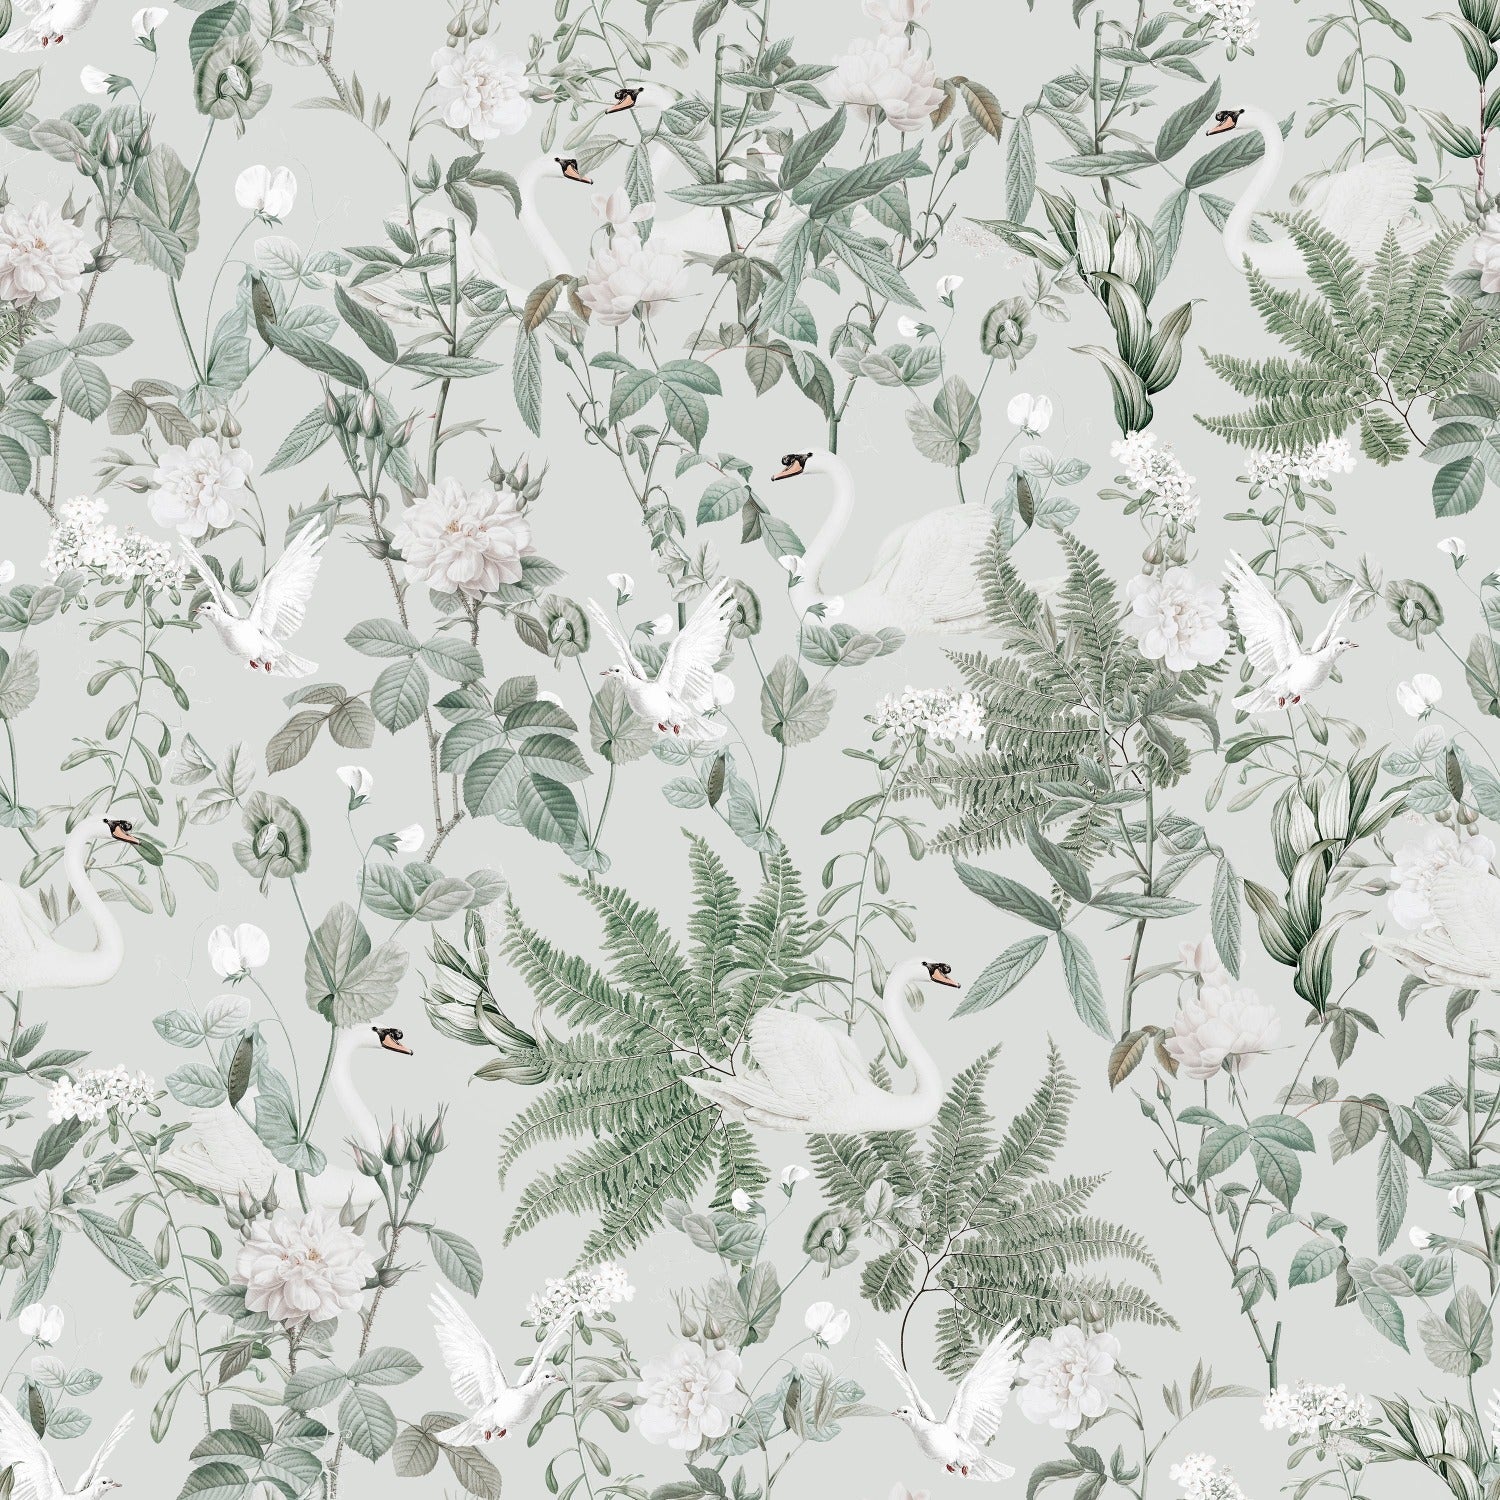 A detailed pattern of the Sage Bird Wallpaper featuring elegant swans and various birds amidst lush green foliage and white floral blossoms, set against a soft sage background. The intricate artwork captures a serene and naturalistic scene.